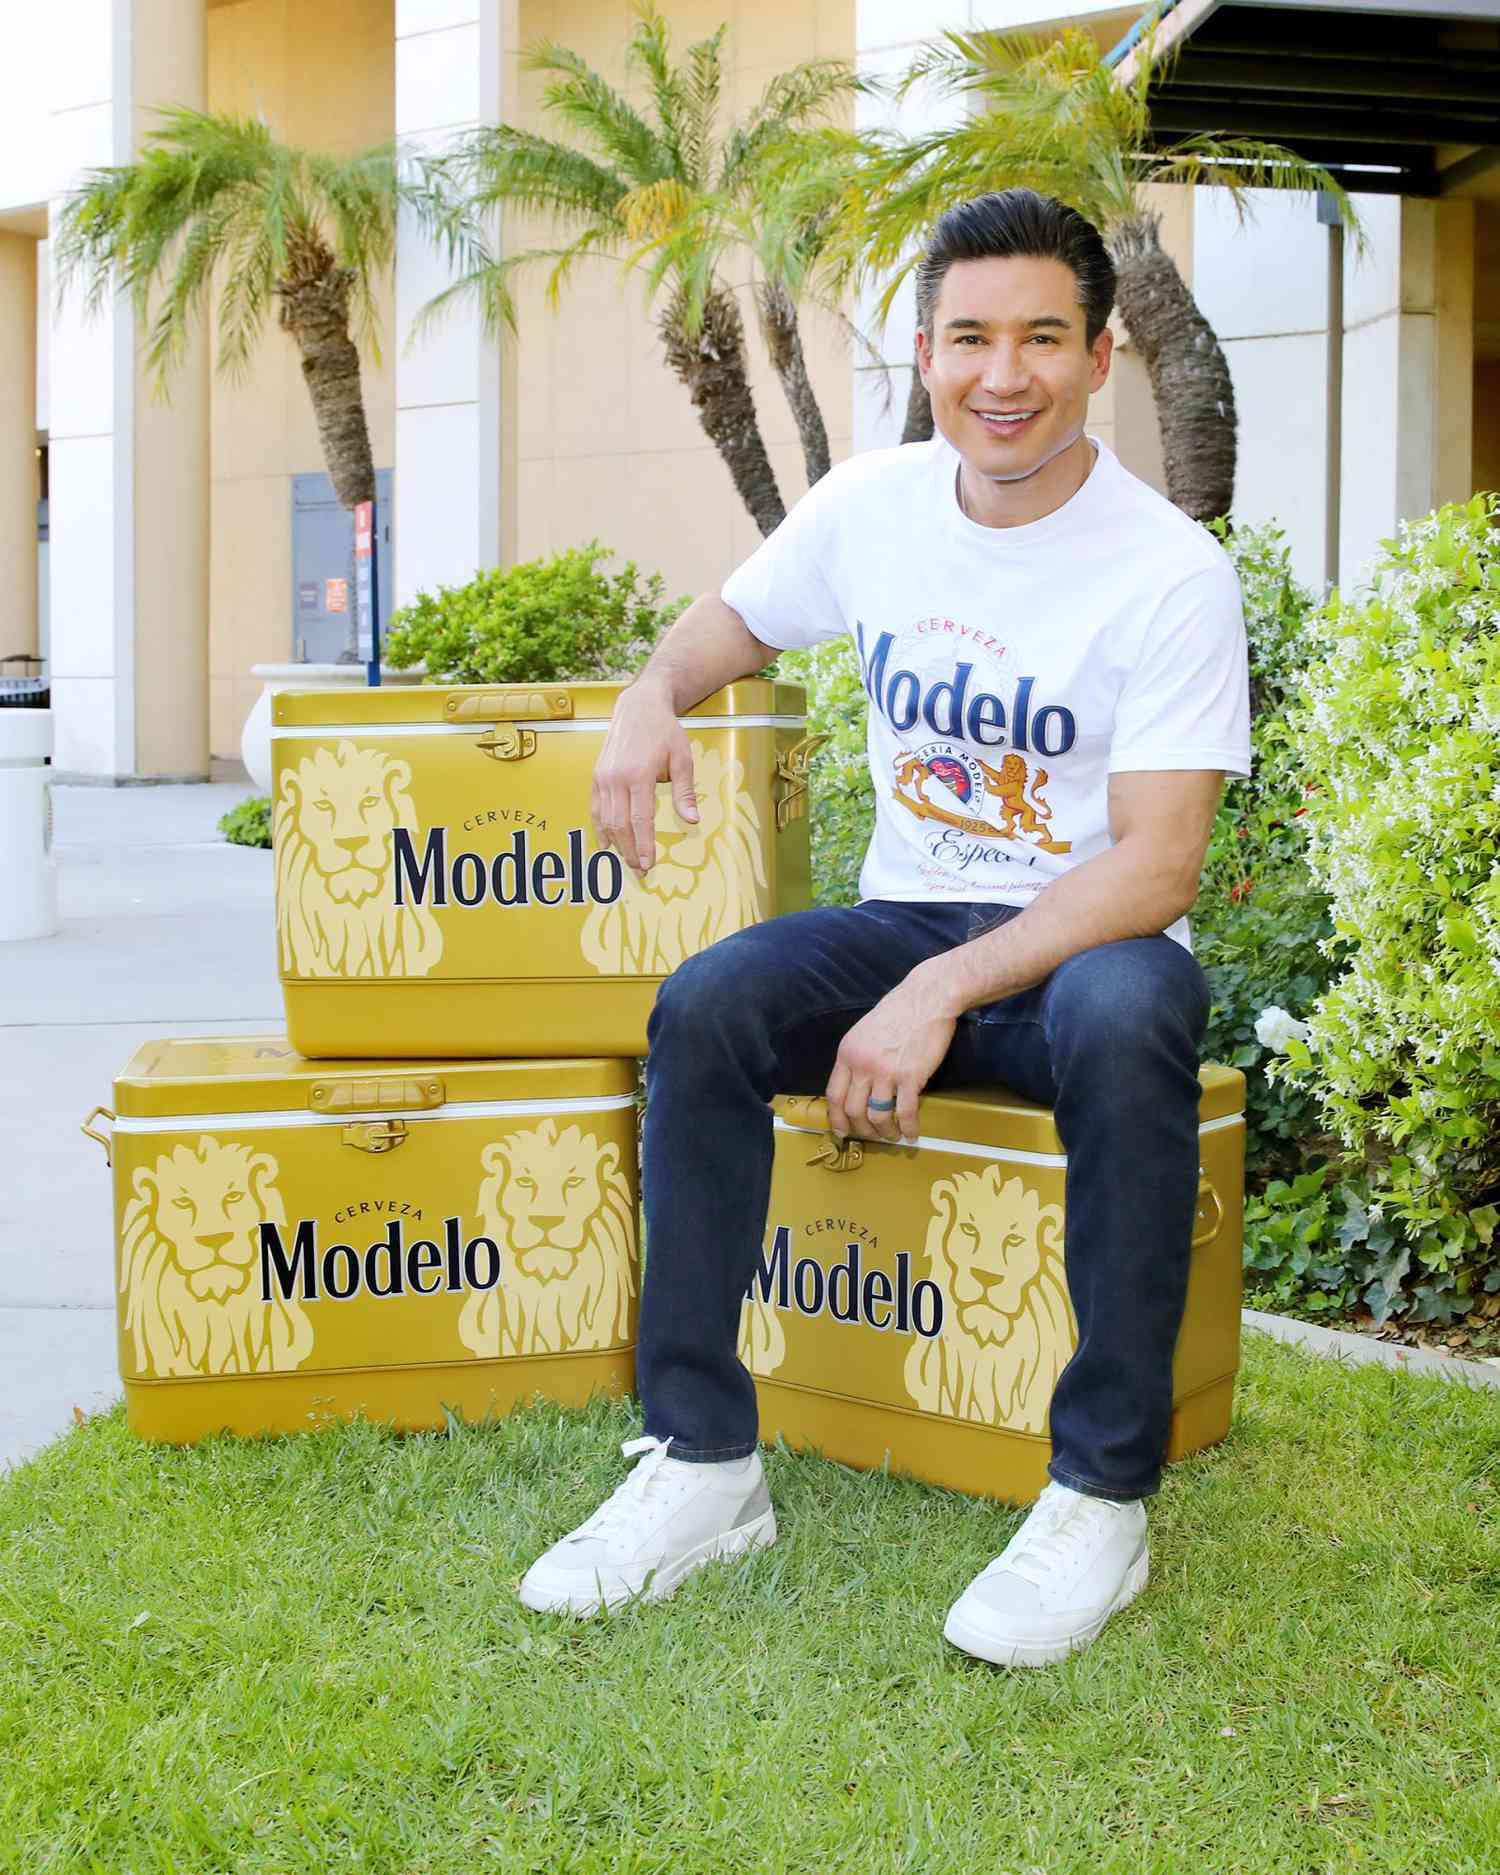 Modelo teamed up with Mario Lopez to thank healthcare workers at Providence Saint Joseph Medical Center in Burbank, Calif., and recognize the hard work and sacrifices of all first responders as part of the Modelo #SaludToCinco campaign